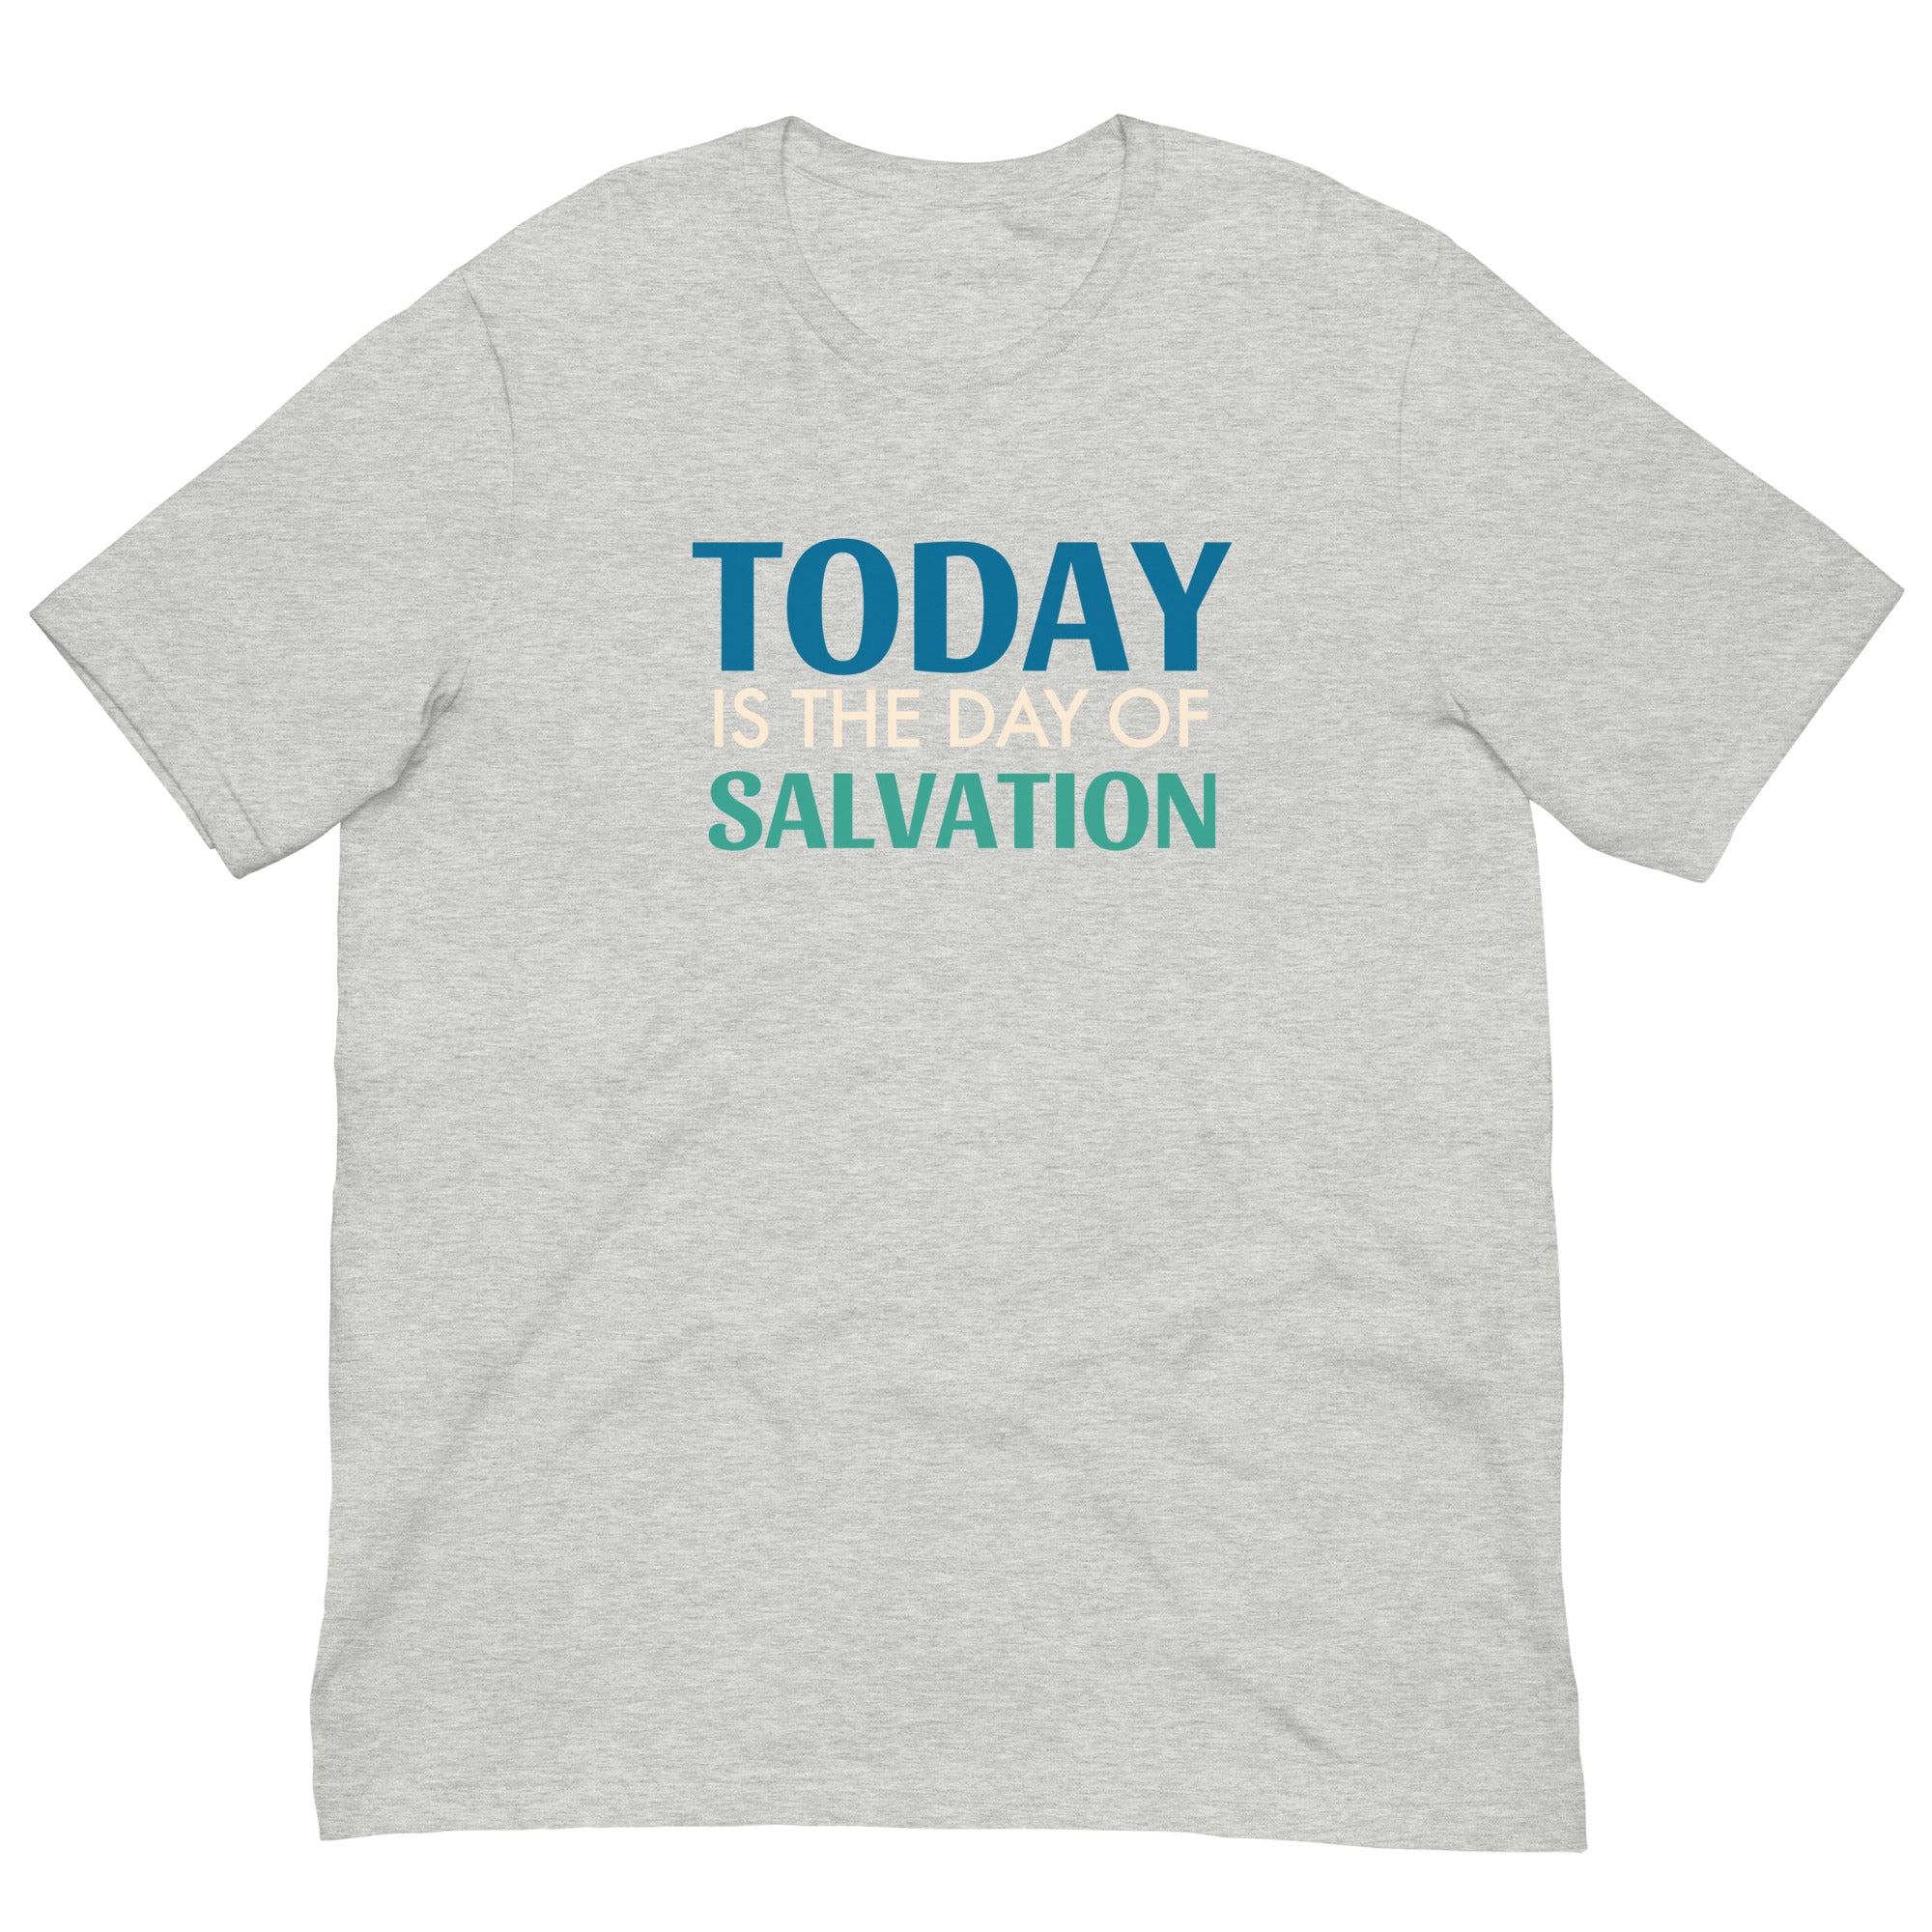 Today is the day of Salvation Unisex t-shirt